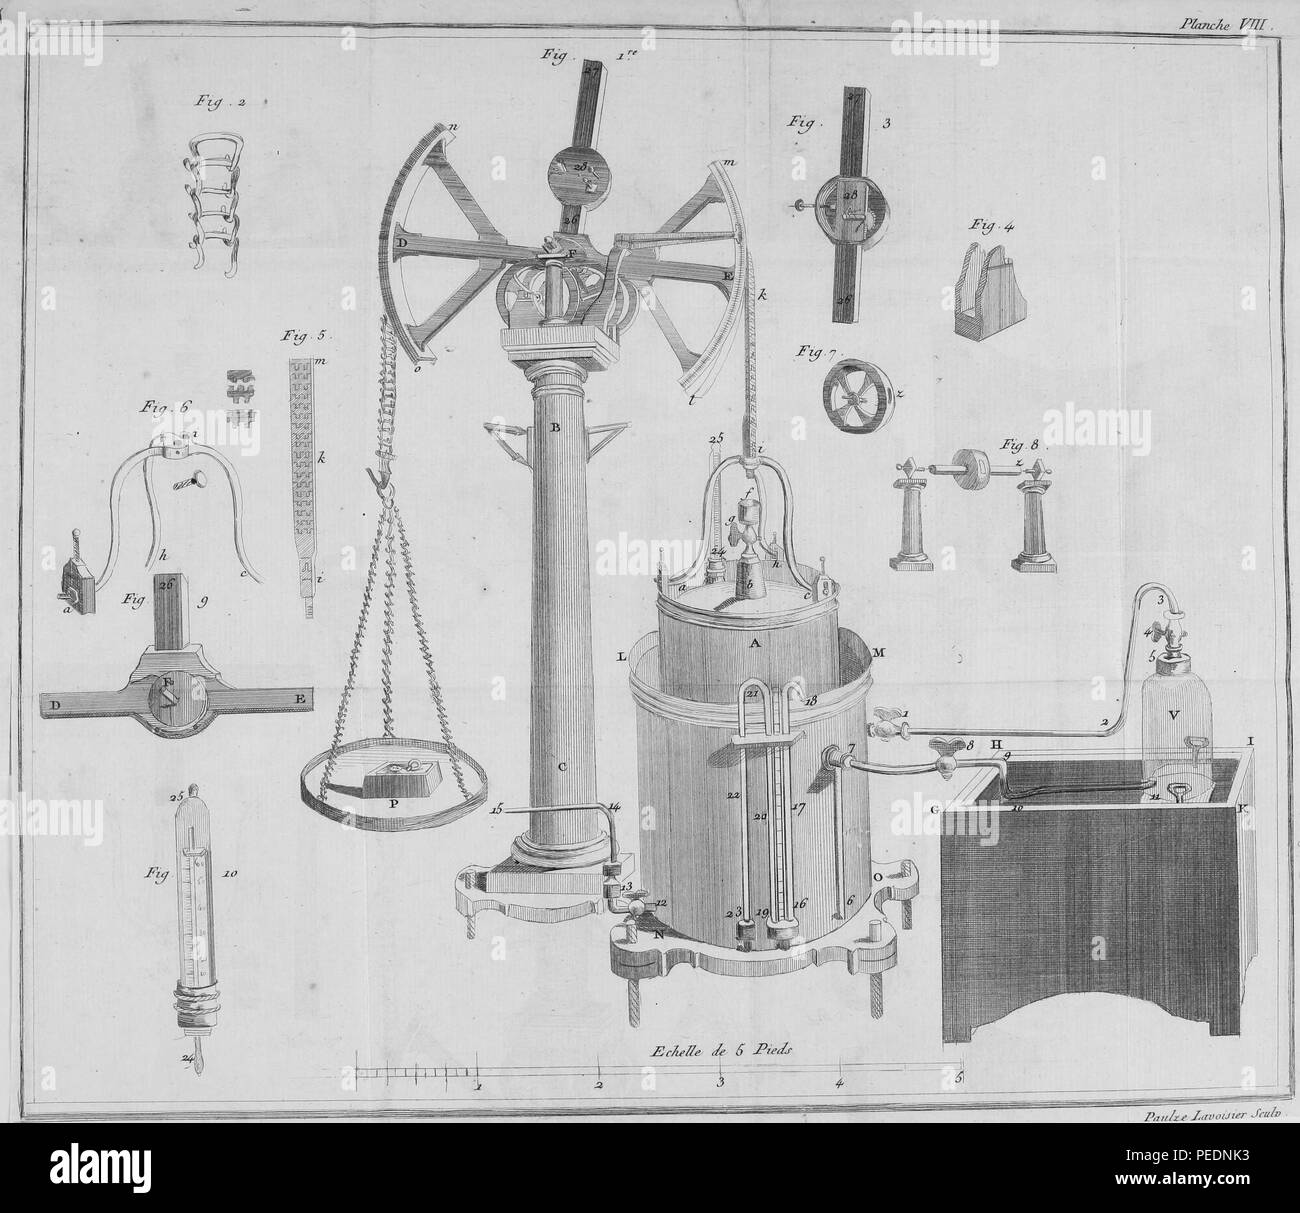 Black and white print illustrating scientific laboratory apparatus set up in a manner used for determining the absolute weights of different gases from Lavoisier's ' Traite elementaire de Chimie' or 'Elementary Treatise of Chemistry', 1789. Courtesy Internet Archive. () Stock Photo